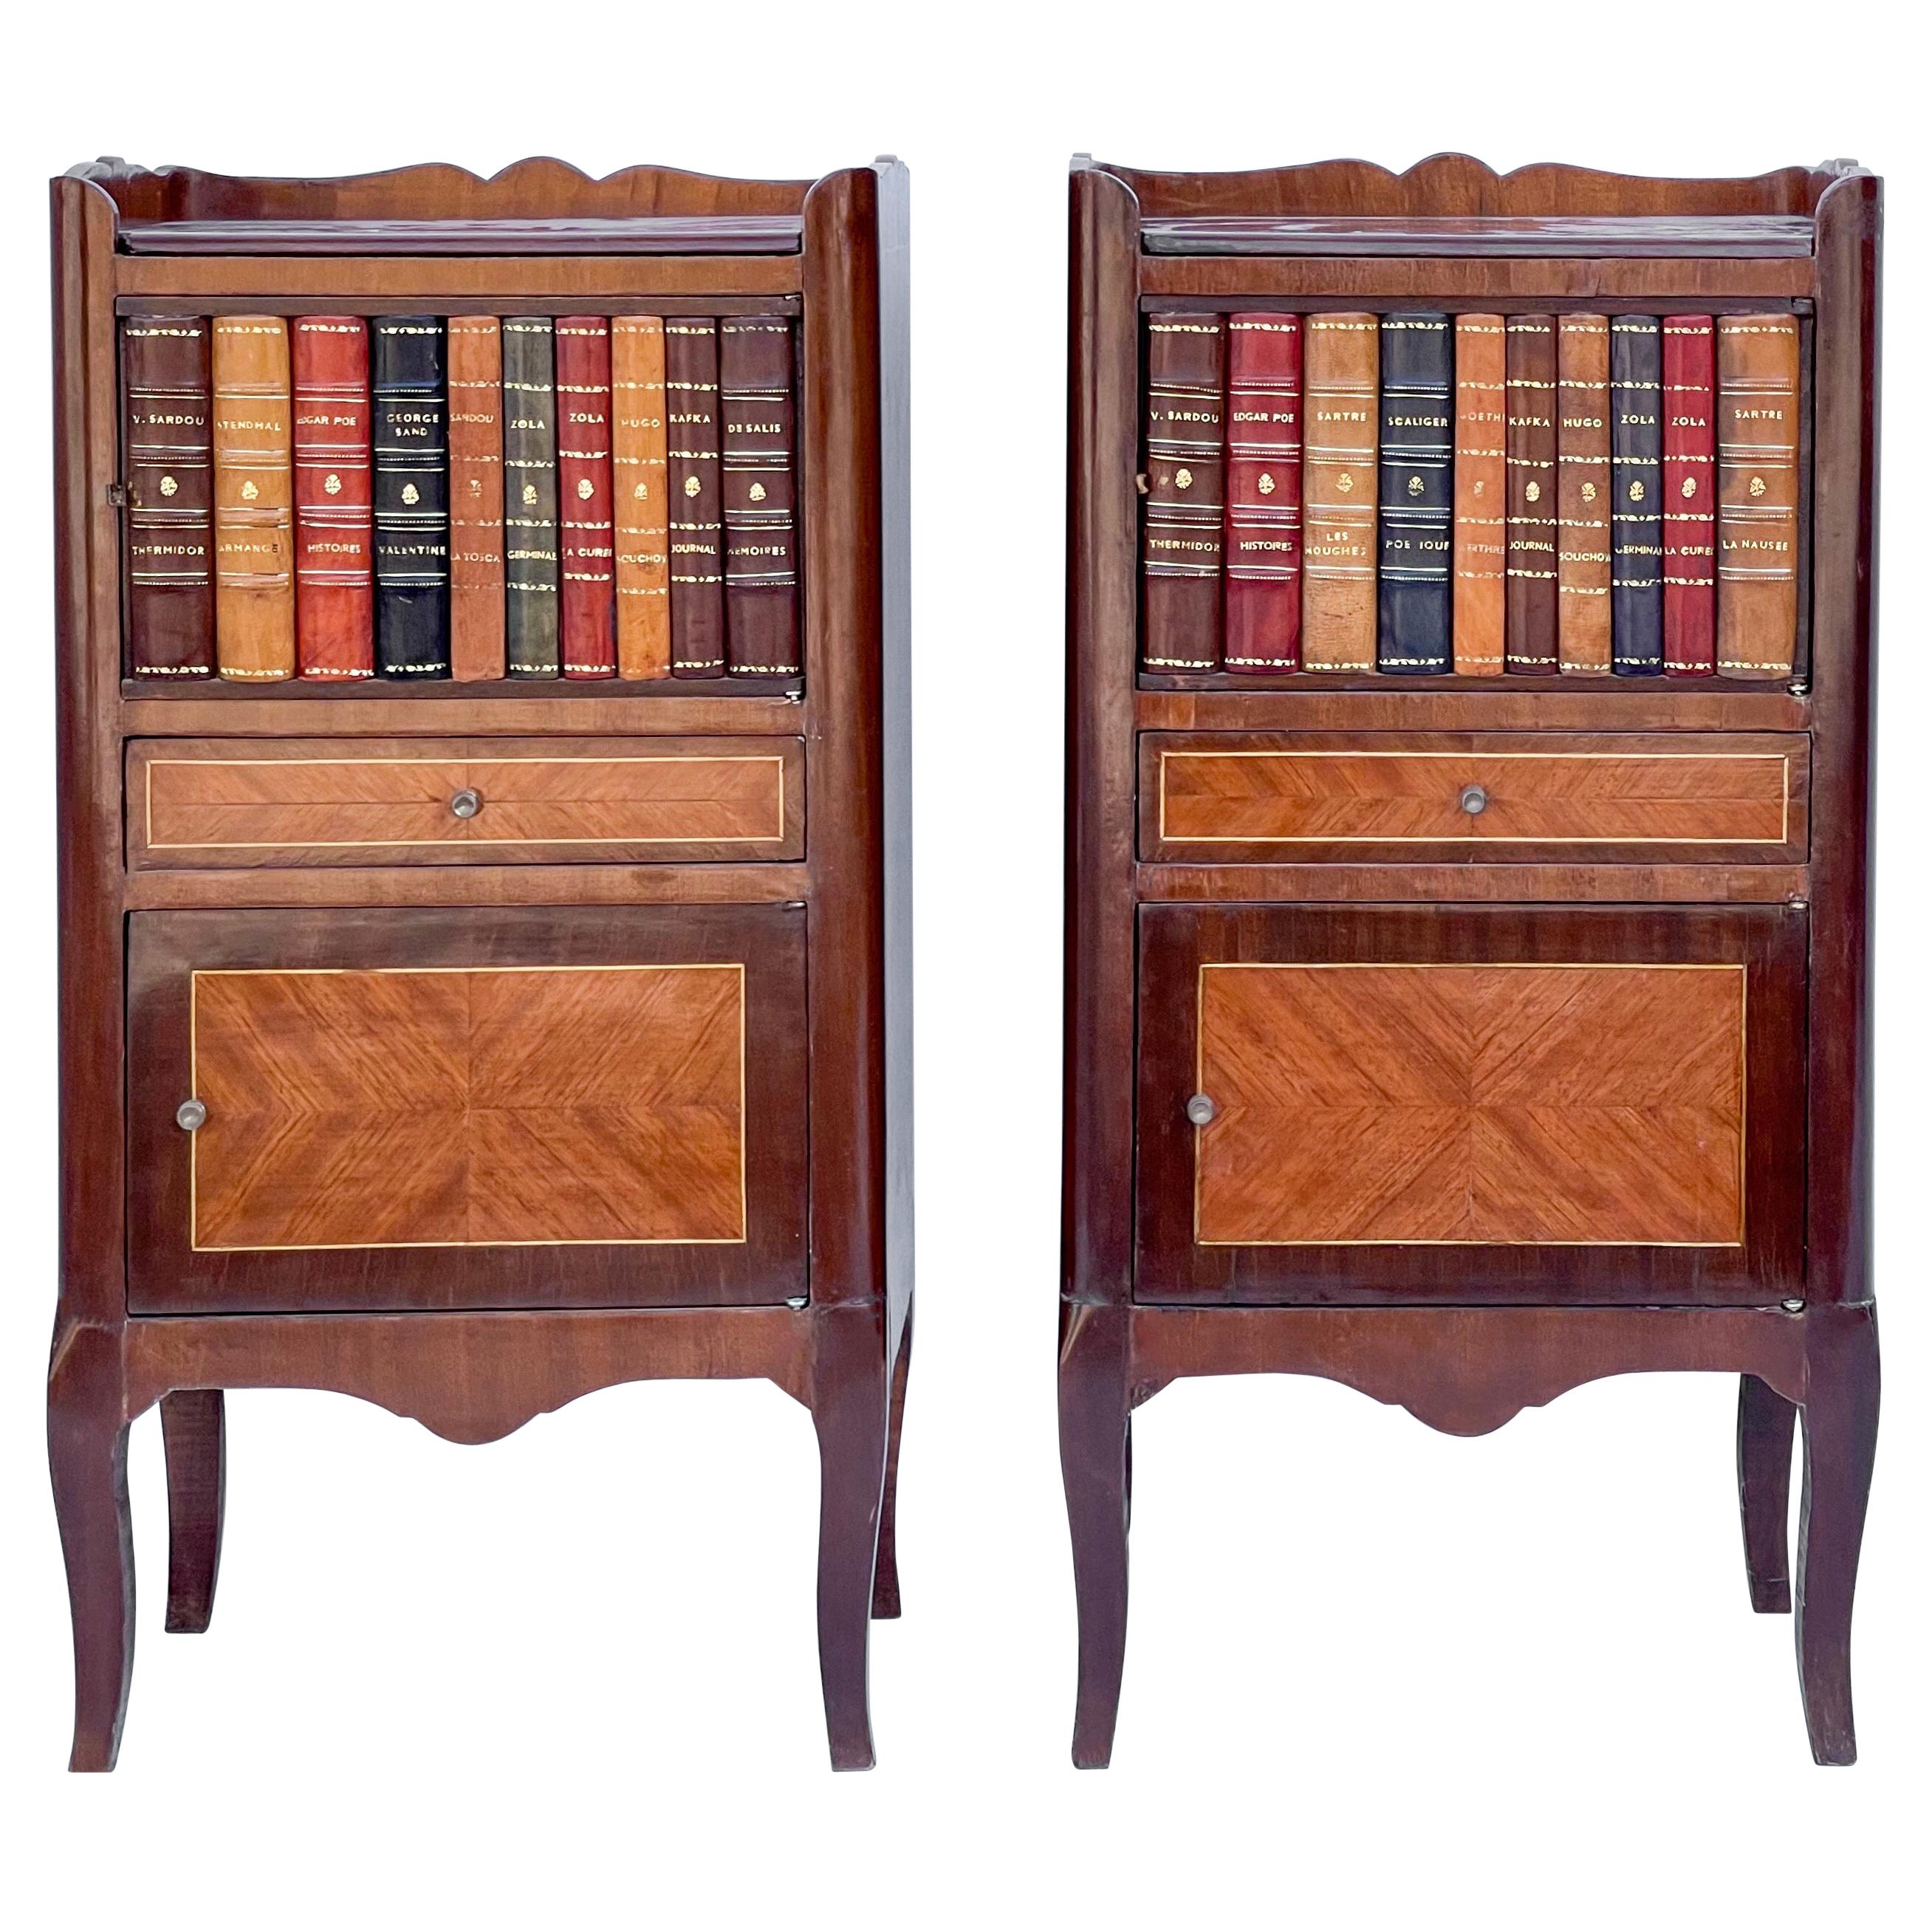 1950s French Style Inlaid Mahogany and Leather Faux Book Side Tables, Pair For Sale